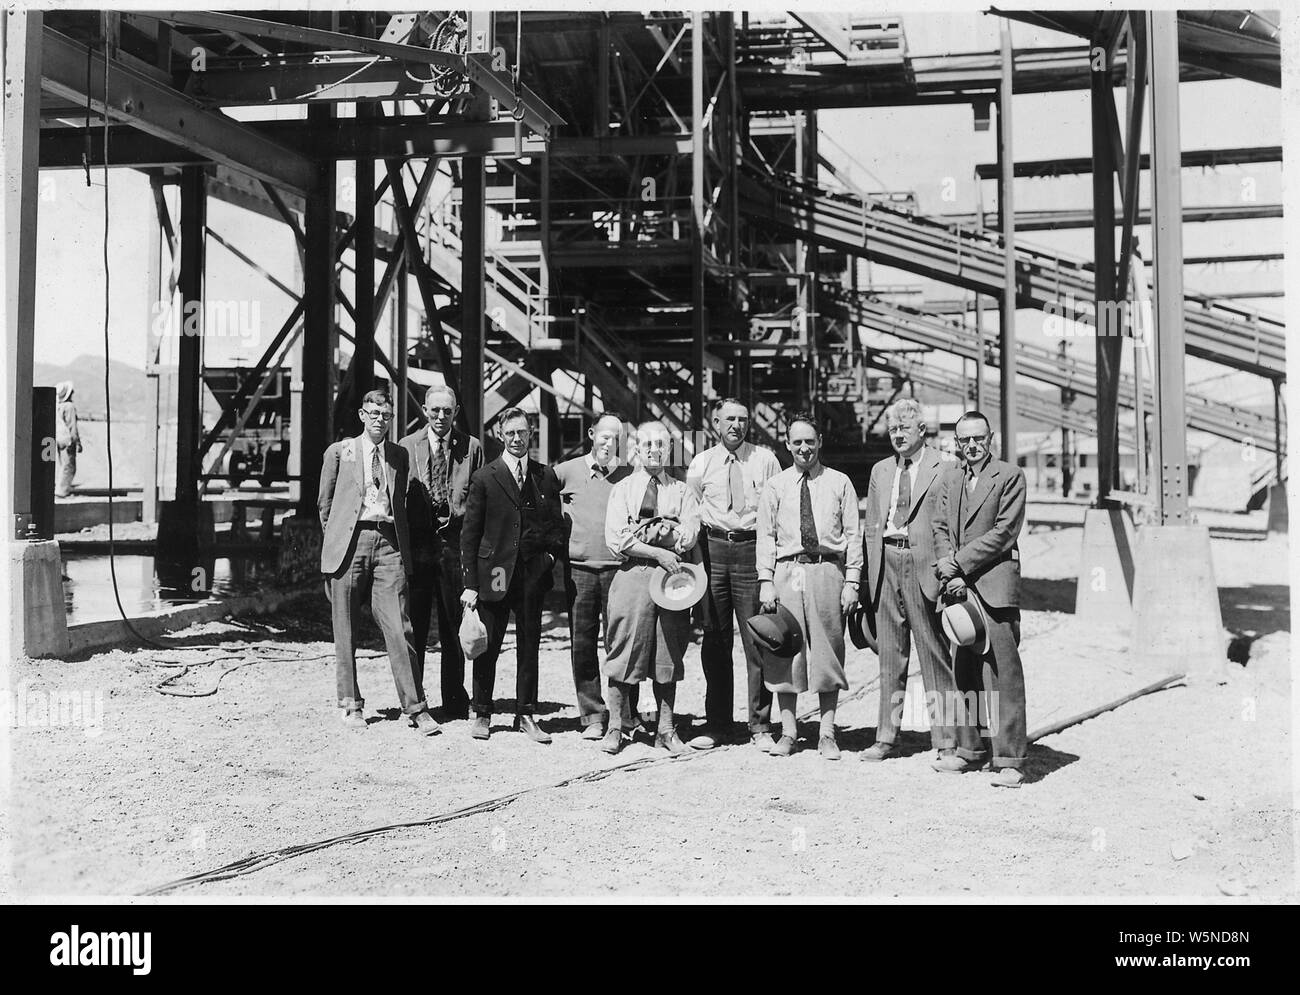 Group including members of the Concrete Consulting Board at the Six Companies' screening and washing plant. From left to right they are: Irving Furlong, Bureau of Standards, San Francisco; B.W. Steele, Designing Engr., Bureau of Reclamation; Arthur Ruettgers, Concrete Technician; T.M. Price, Six Co's. Supt. of railroad and screening plant; P.H. Bates, Bureau of Standards, Washington, D.C.; Ralph Lowry, Field Engineer, Bureau of Reclamation; Prof. R.E. Davis, Univ. of Calif; F.R. McMillan, Portland Cement Assn., Chicago; Walker R. Young, Construction Engineer, Bureau of Reclamation.; Scope and Stock Photo